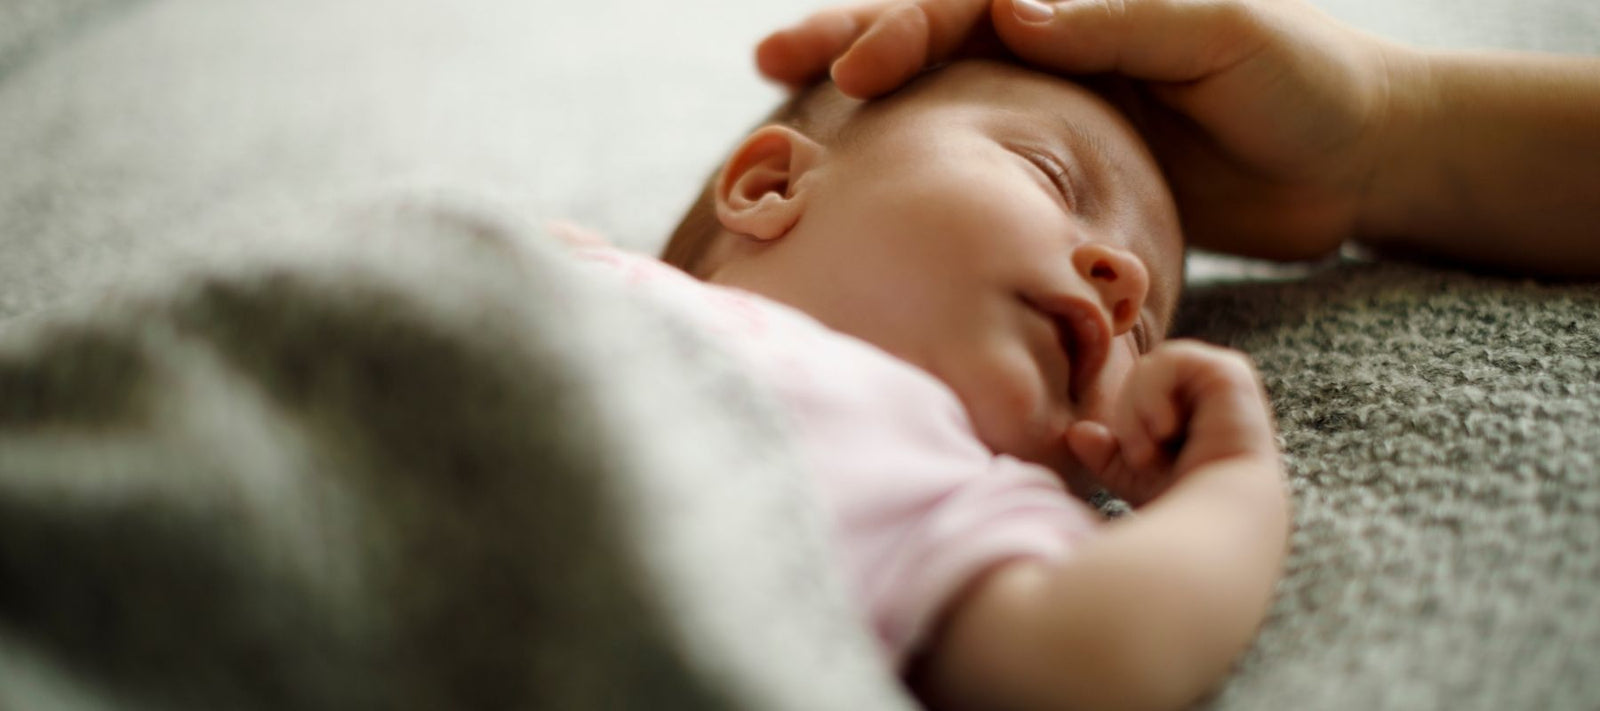 Baby Sleep Training: What You Need to Know